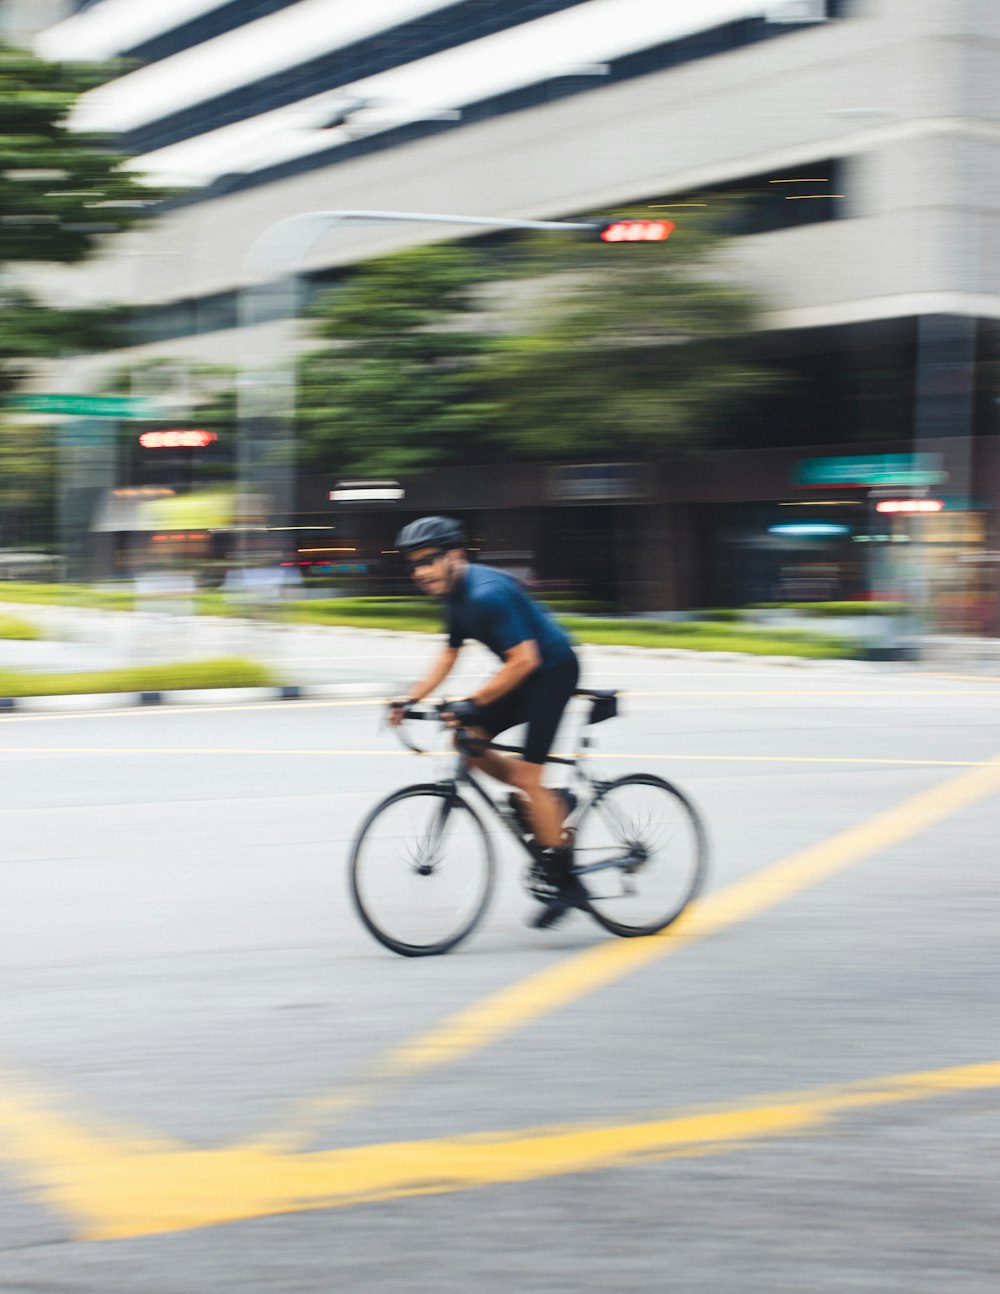 man in blue shirt riding on bicycle on road during daytime